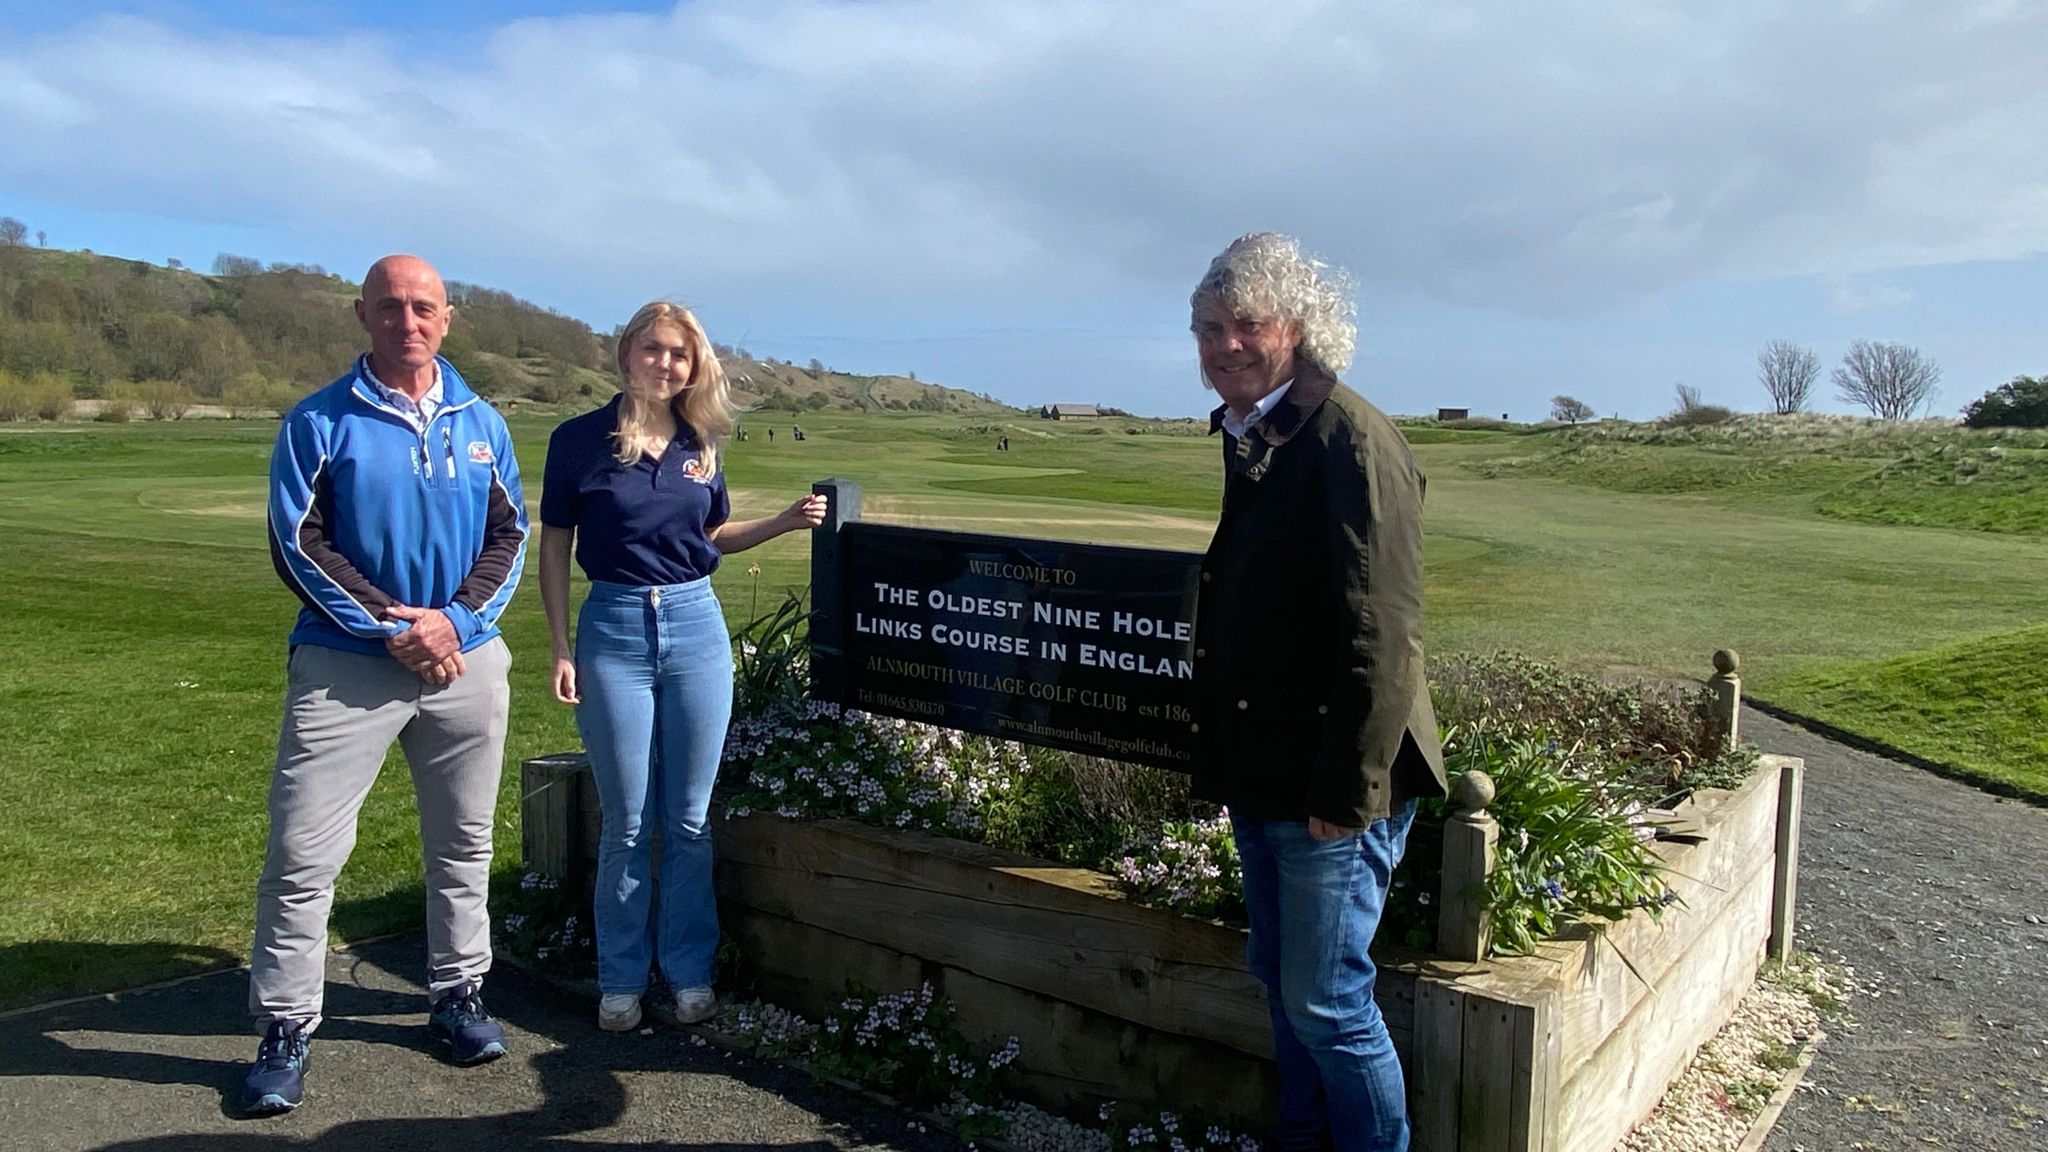 Three people gathered around a sign which says The Oldest Nine Hole LinksCourse in England